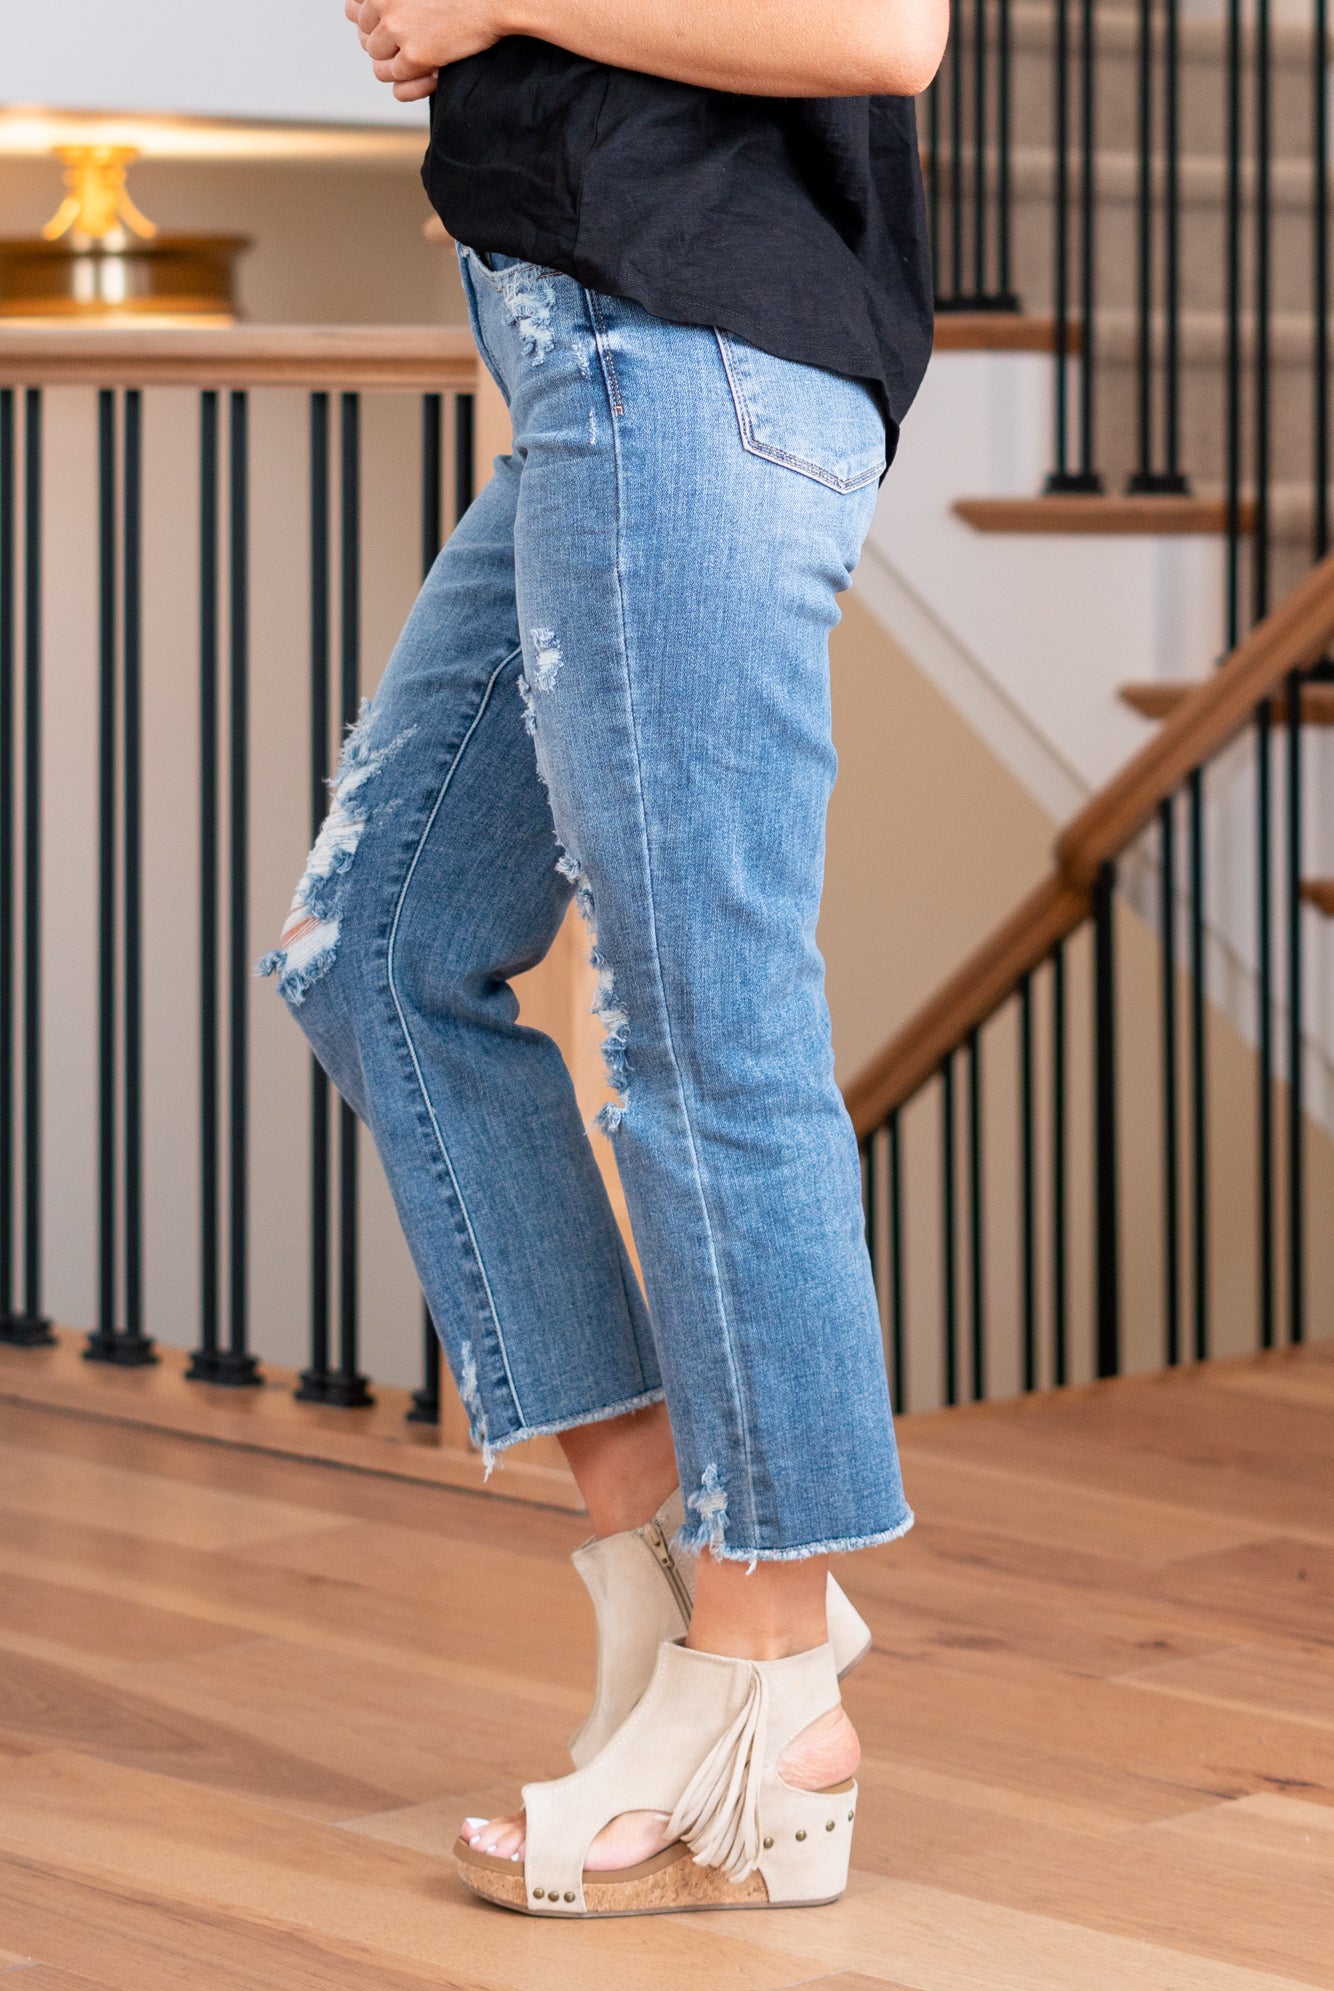 Judy Blue  Update your wardrobe with these high rise cropped straight fit jeans. Color: Medium Blue  Cut: Straight fit, 25"* High Rise, 11" Front Rise* Material: 93% Cotton / 6% Polyester / 1% Spandex Stitching: Classic Fly: Zipper Fly Style #: JB82434 | 82434 Contact us for any additional measurements or sizing.   *Measured on the smallest size, measurements may vary by size.  Sarah wears a size 25 in jeans, a small in tops, and 8 in shoes. She is wearing size 25 in these jeans. 